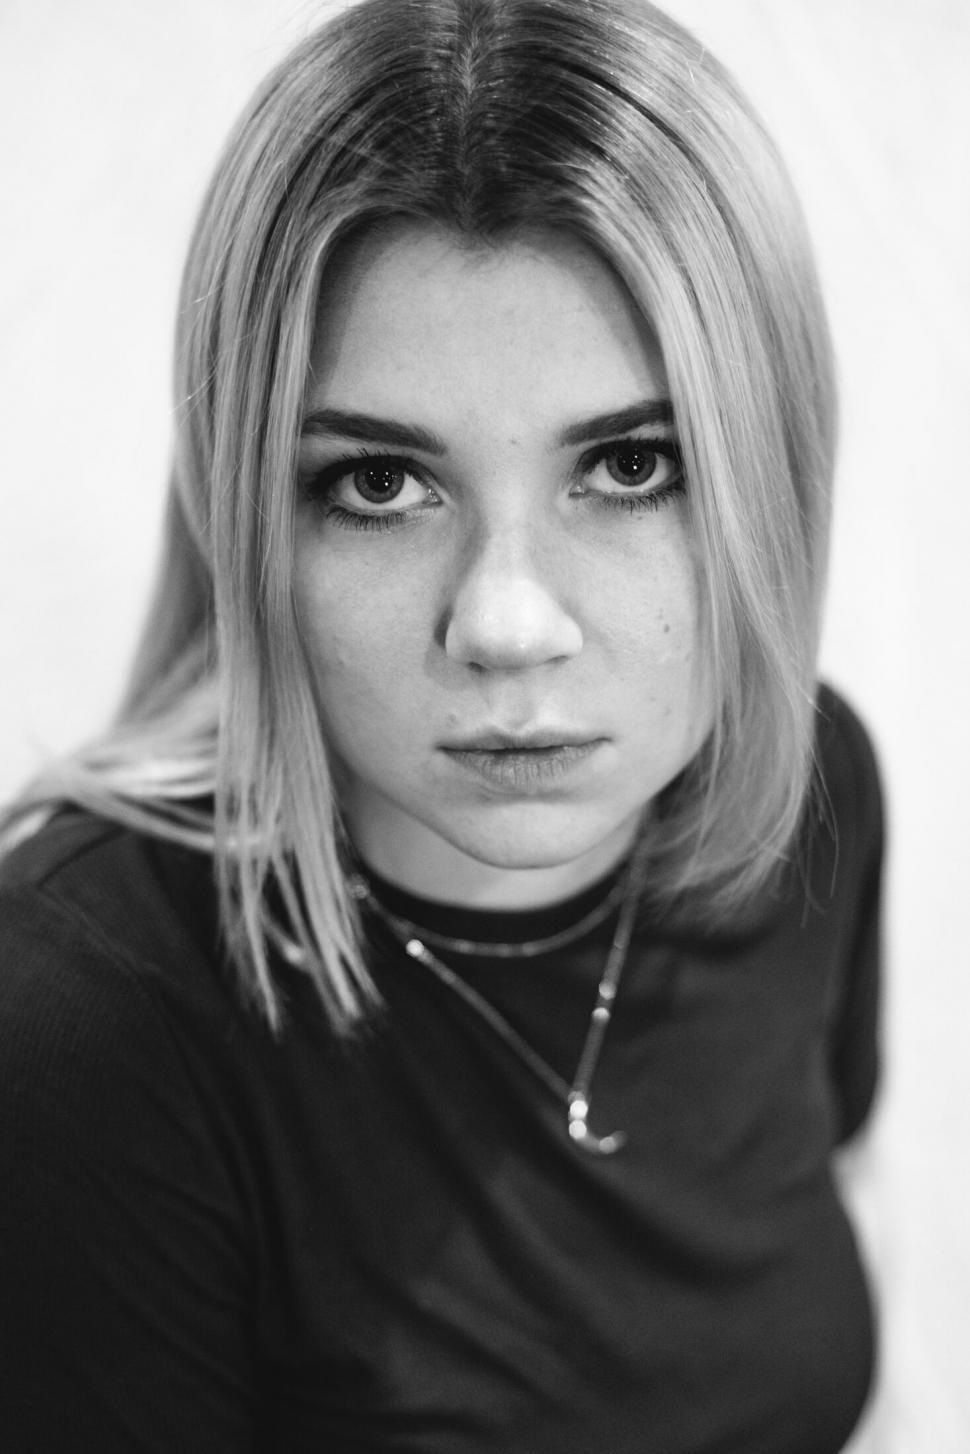 Free Image of Monochrome portrait of serious woman 